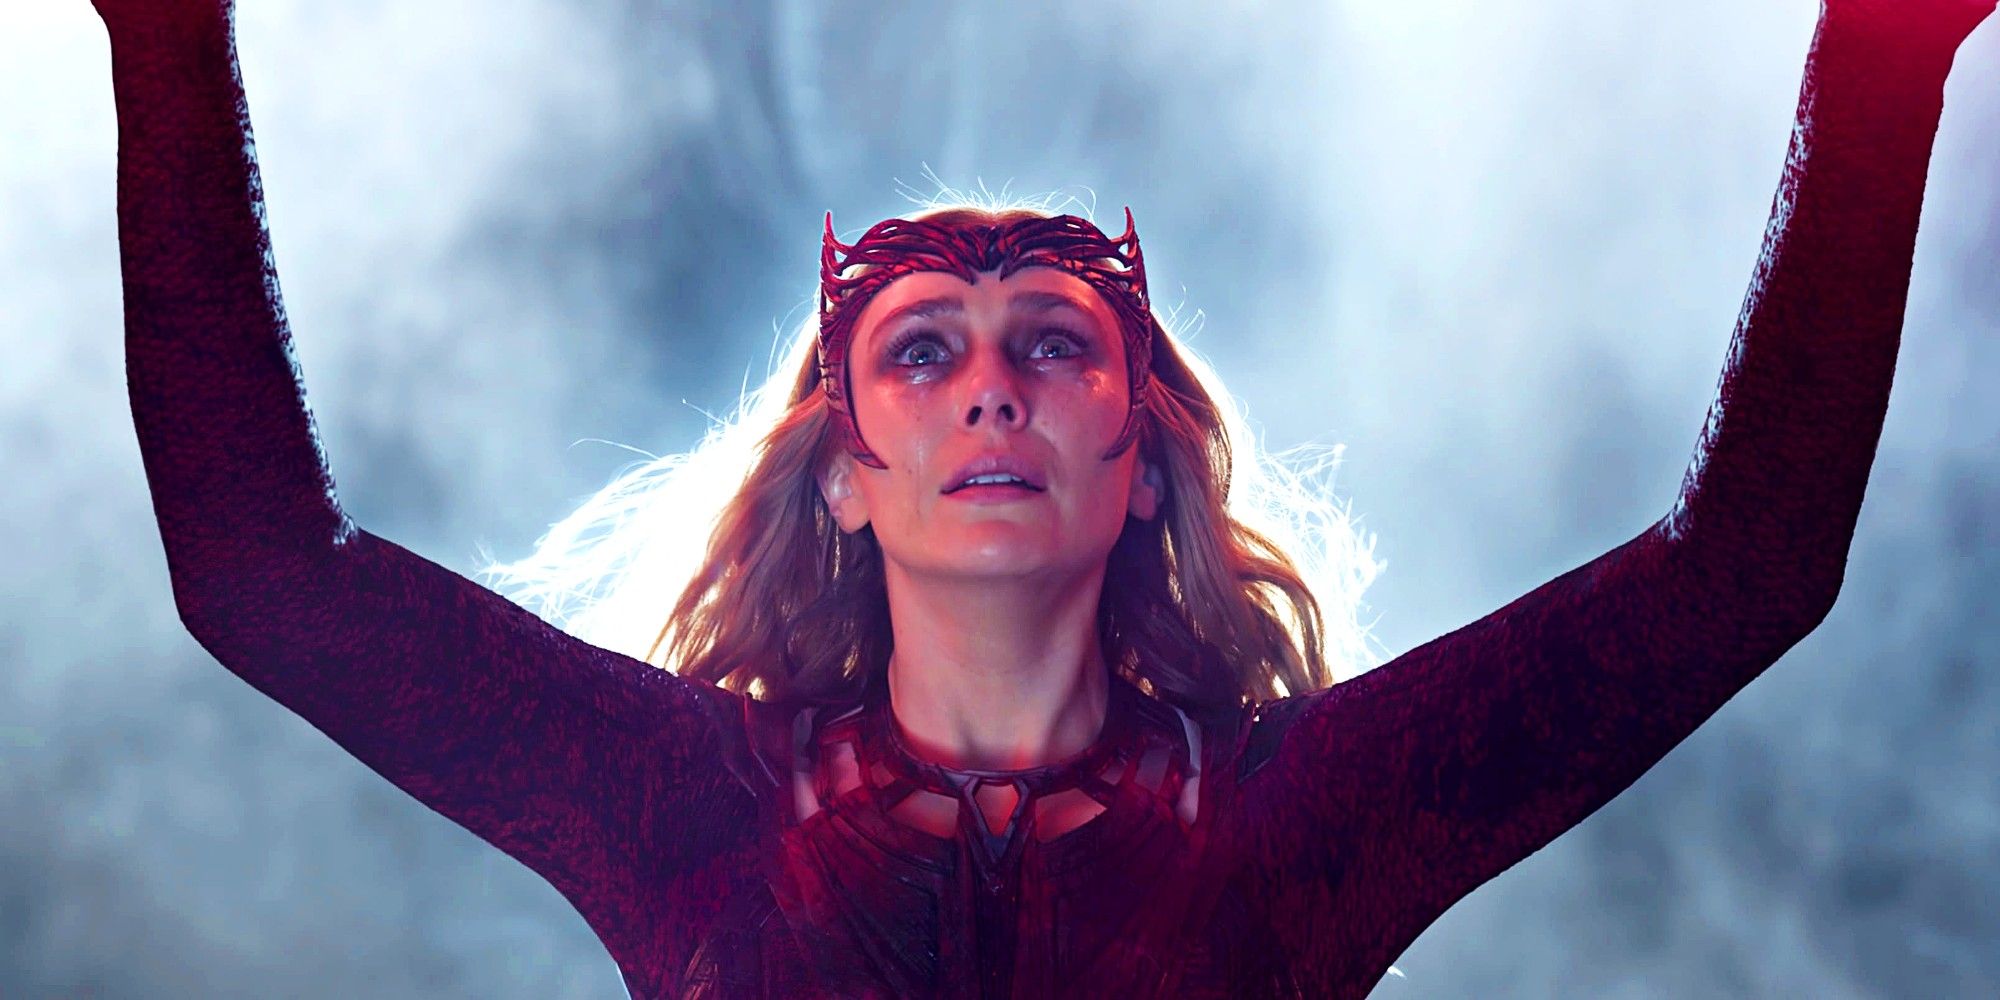 Elizabeth Olsen raising her arms up as she performs magic as Scarlet Witch in Doctor Strange in the Multiverse of Madness